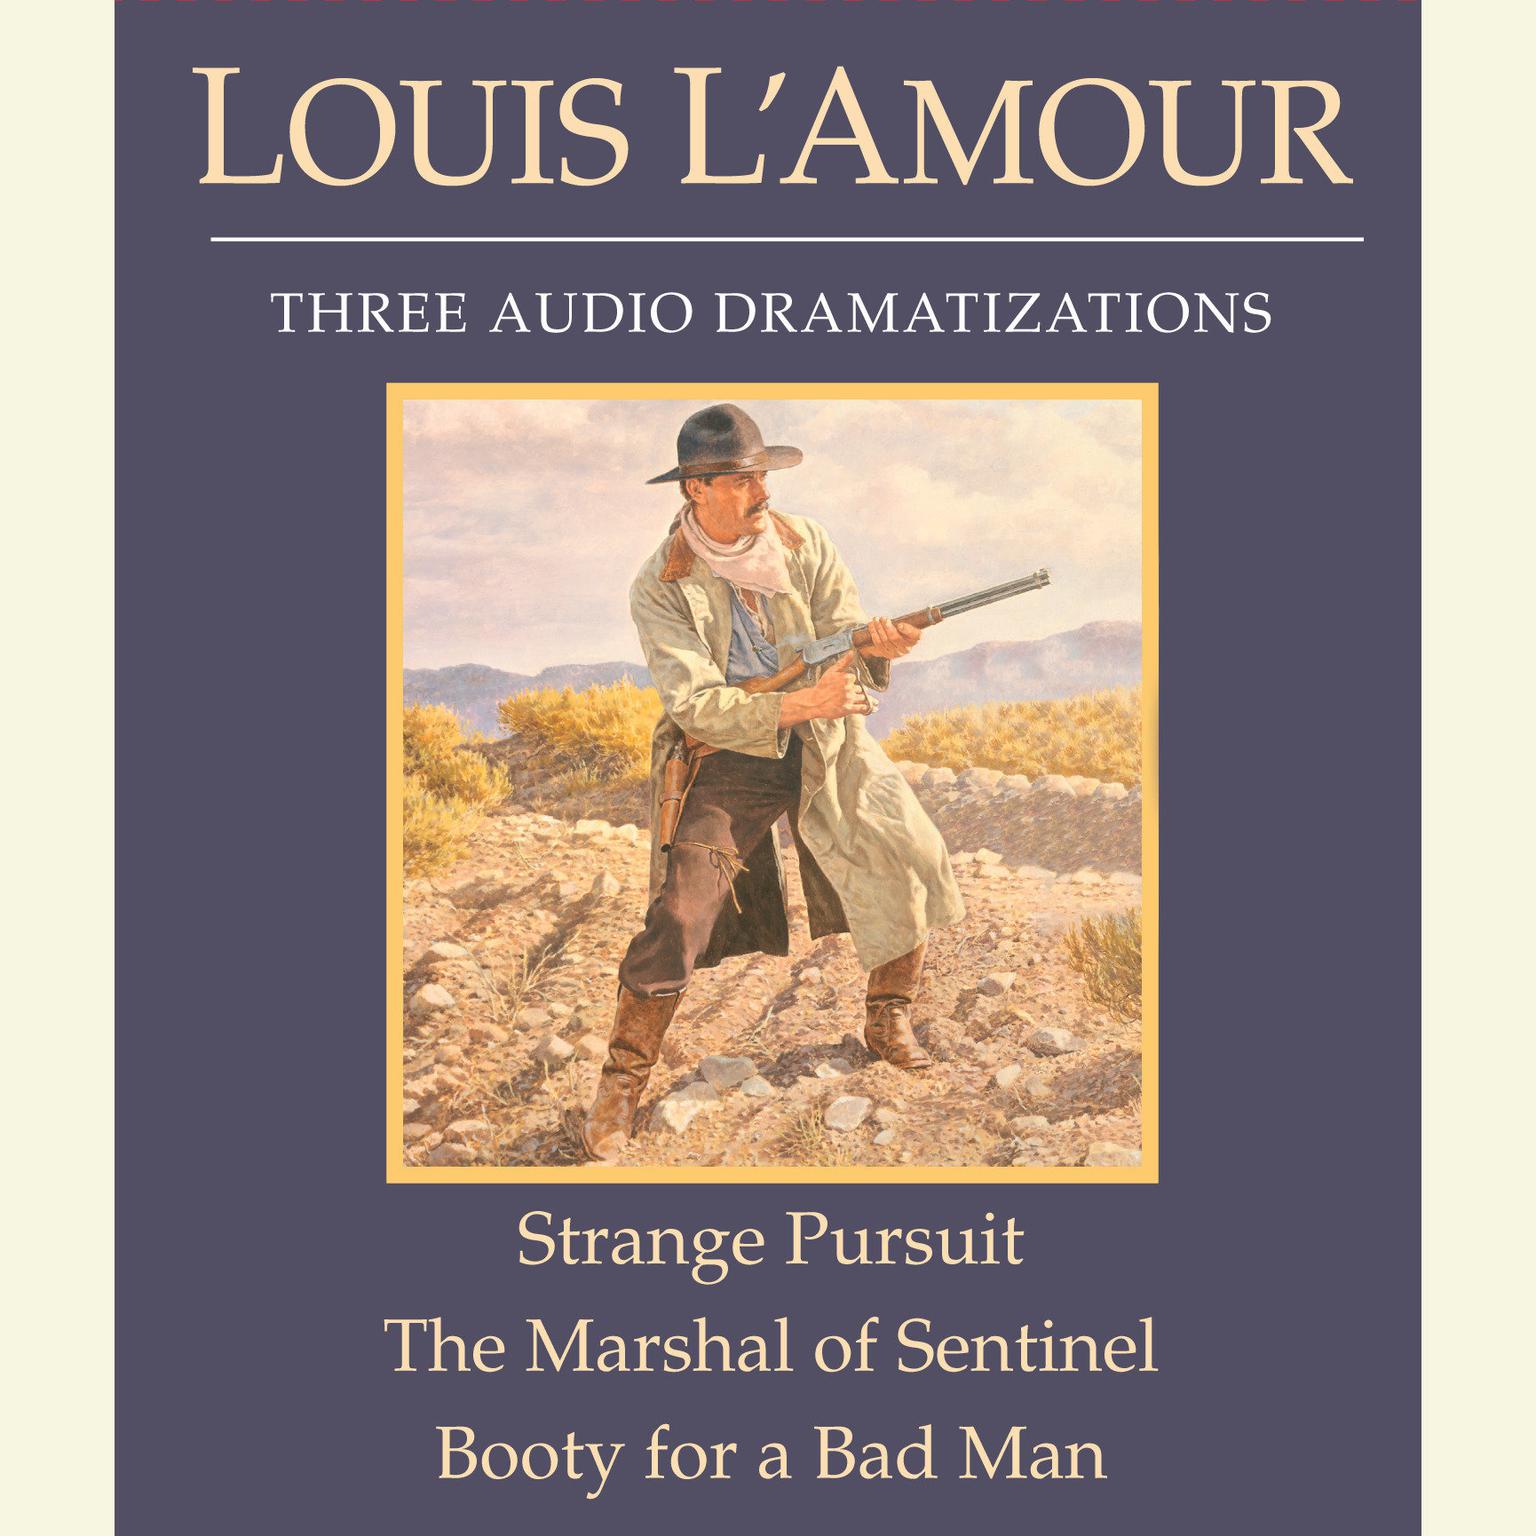 Strange Pursuit/The Marshal of Sentinel/Booty for a Bad Man Audiobook, by Louis L’Amour